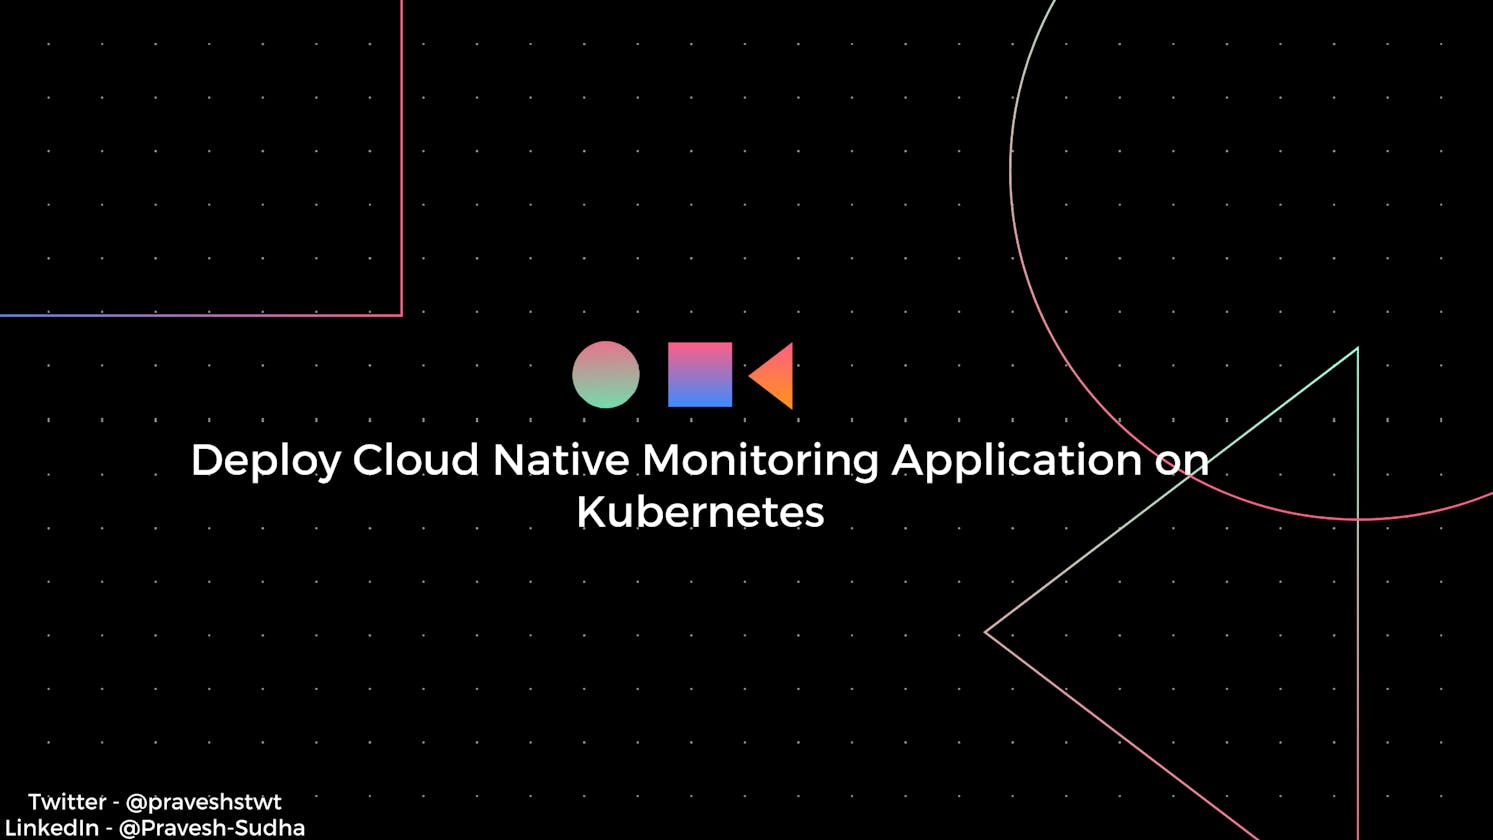 Deploy a Cloud Native Monitoring Application on Kubernetes